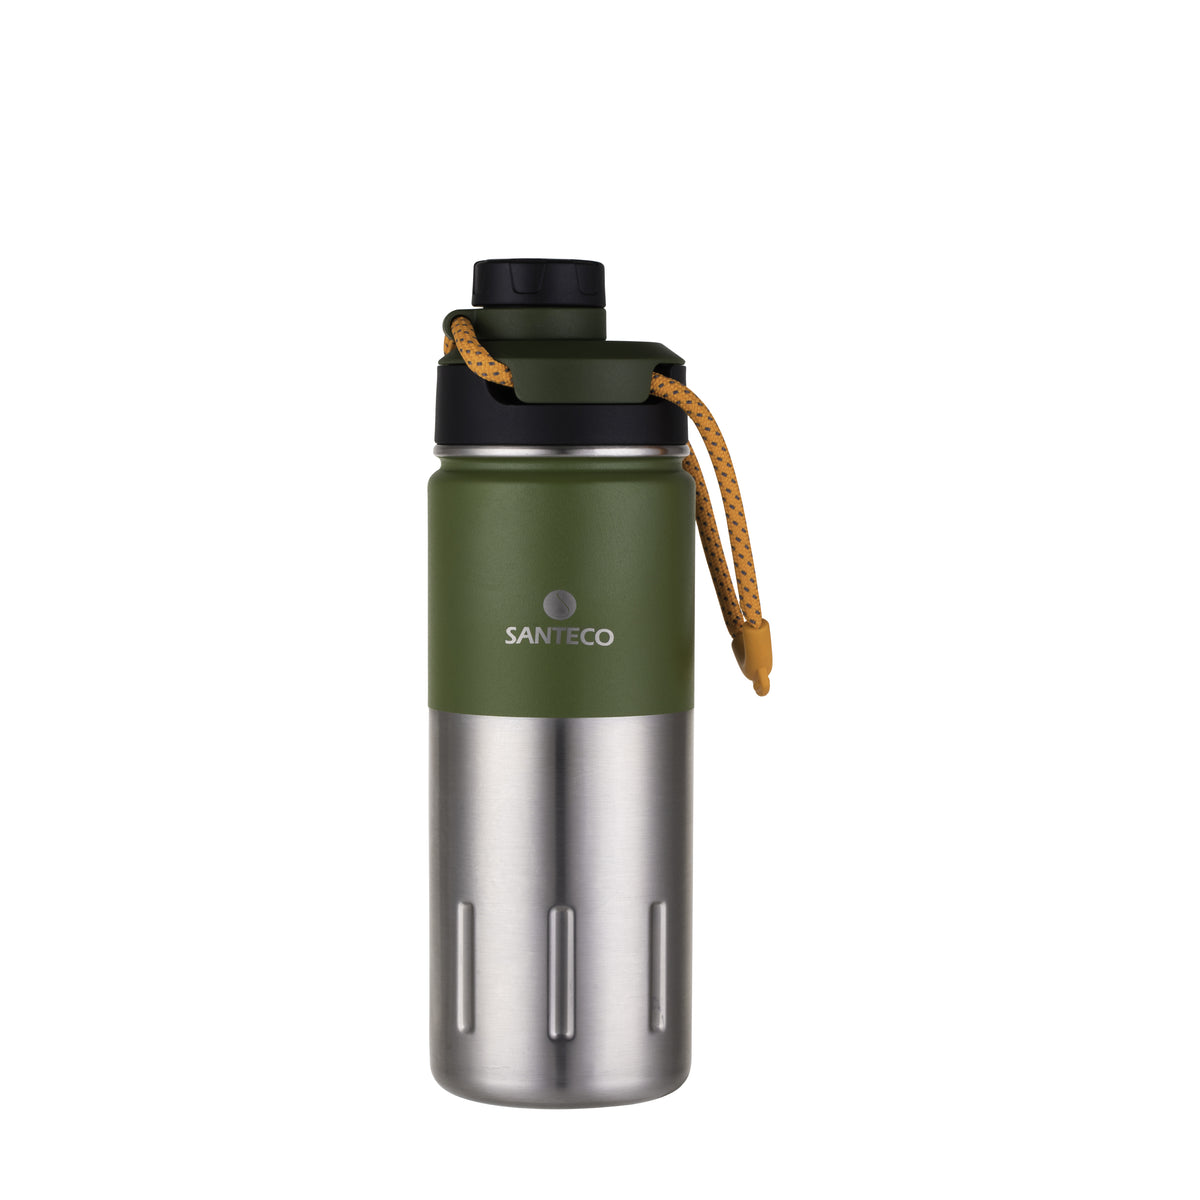 SANTECO Ktwo Sports Bottle, 17 oz, Stainless Steel, Vacuum Insulated